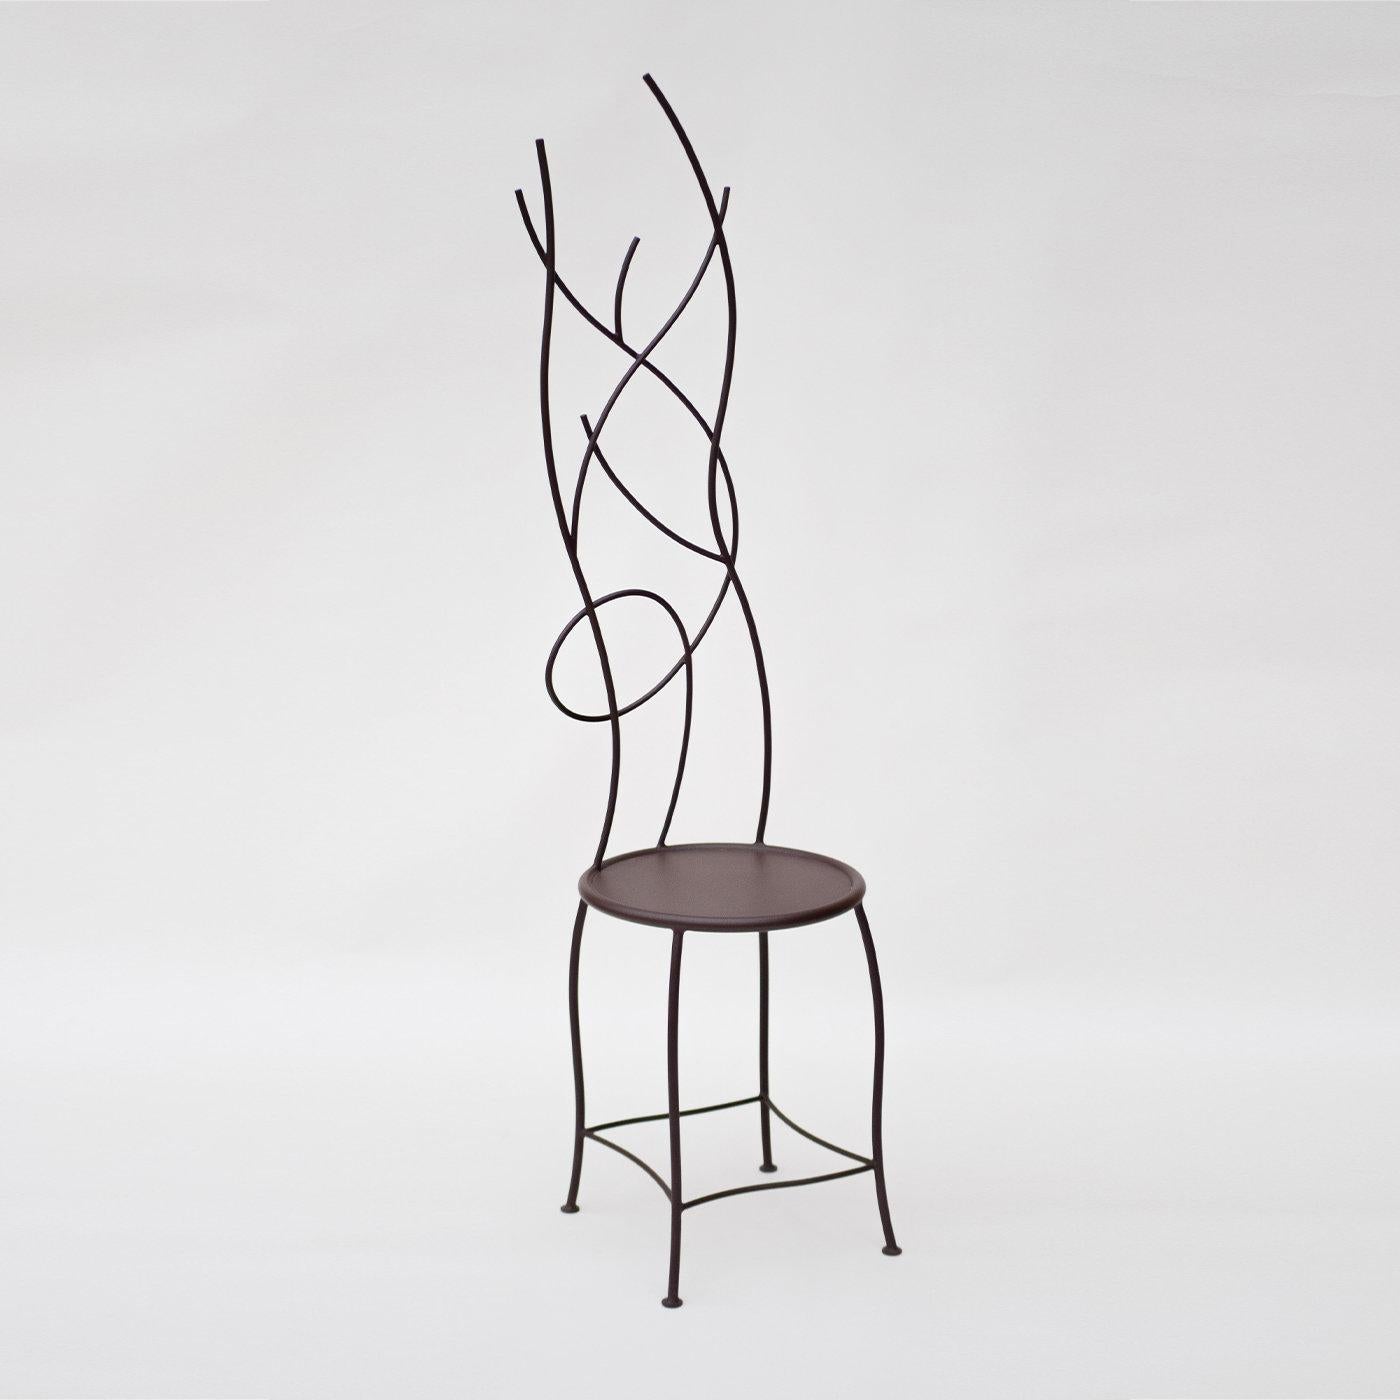 Brimming with undisputed sculptural flair, this rust-colored chair in wrought iron was deftly handcrafted to offer the illusion of sitting against a tangle of slender branches and twigs, the same branches crowning trees (